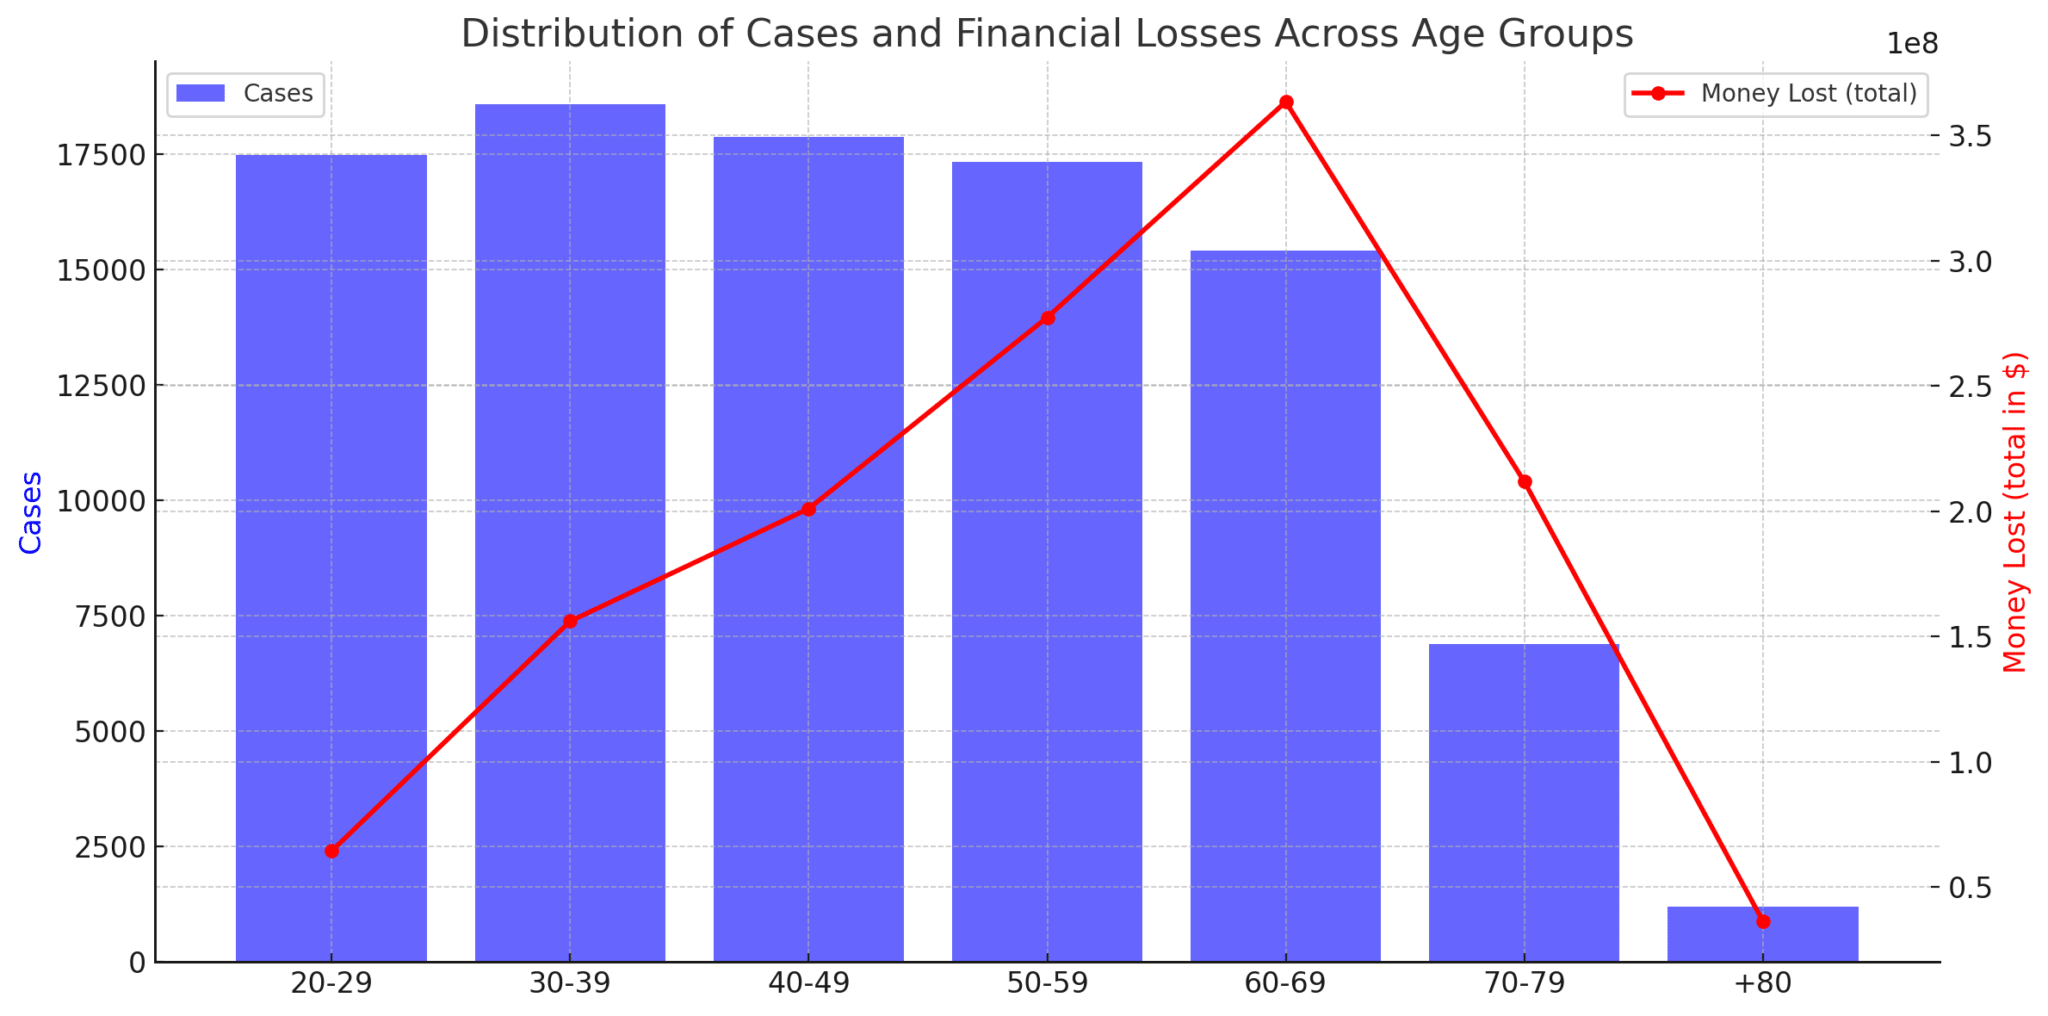 Distribution of Cases and Financial Losses Across Age Groups